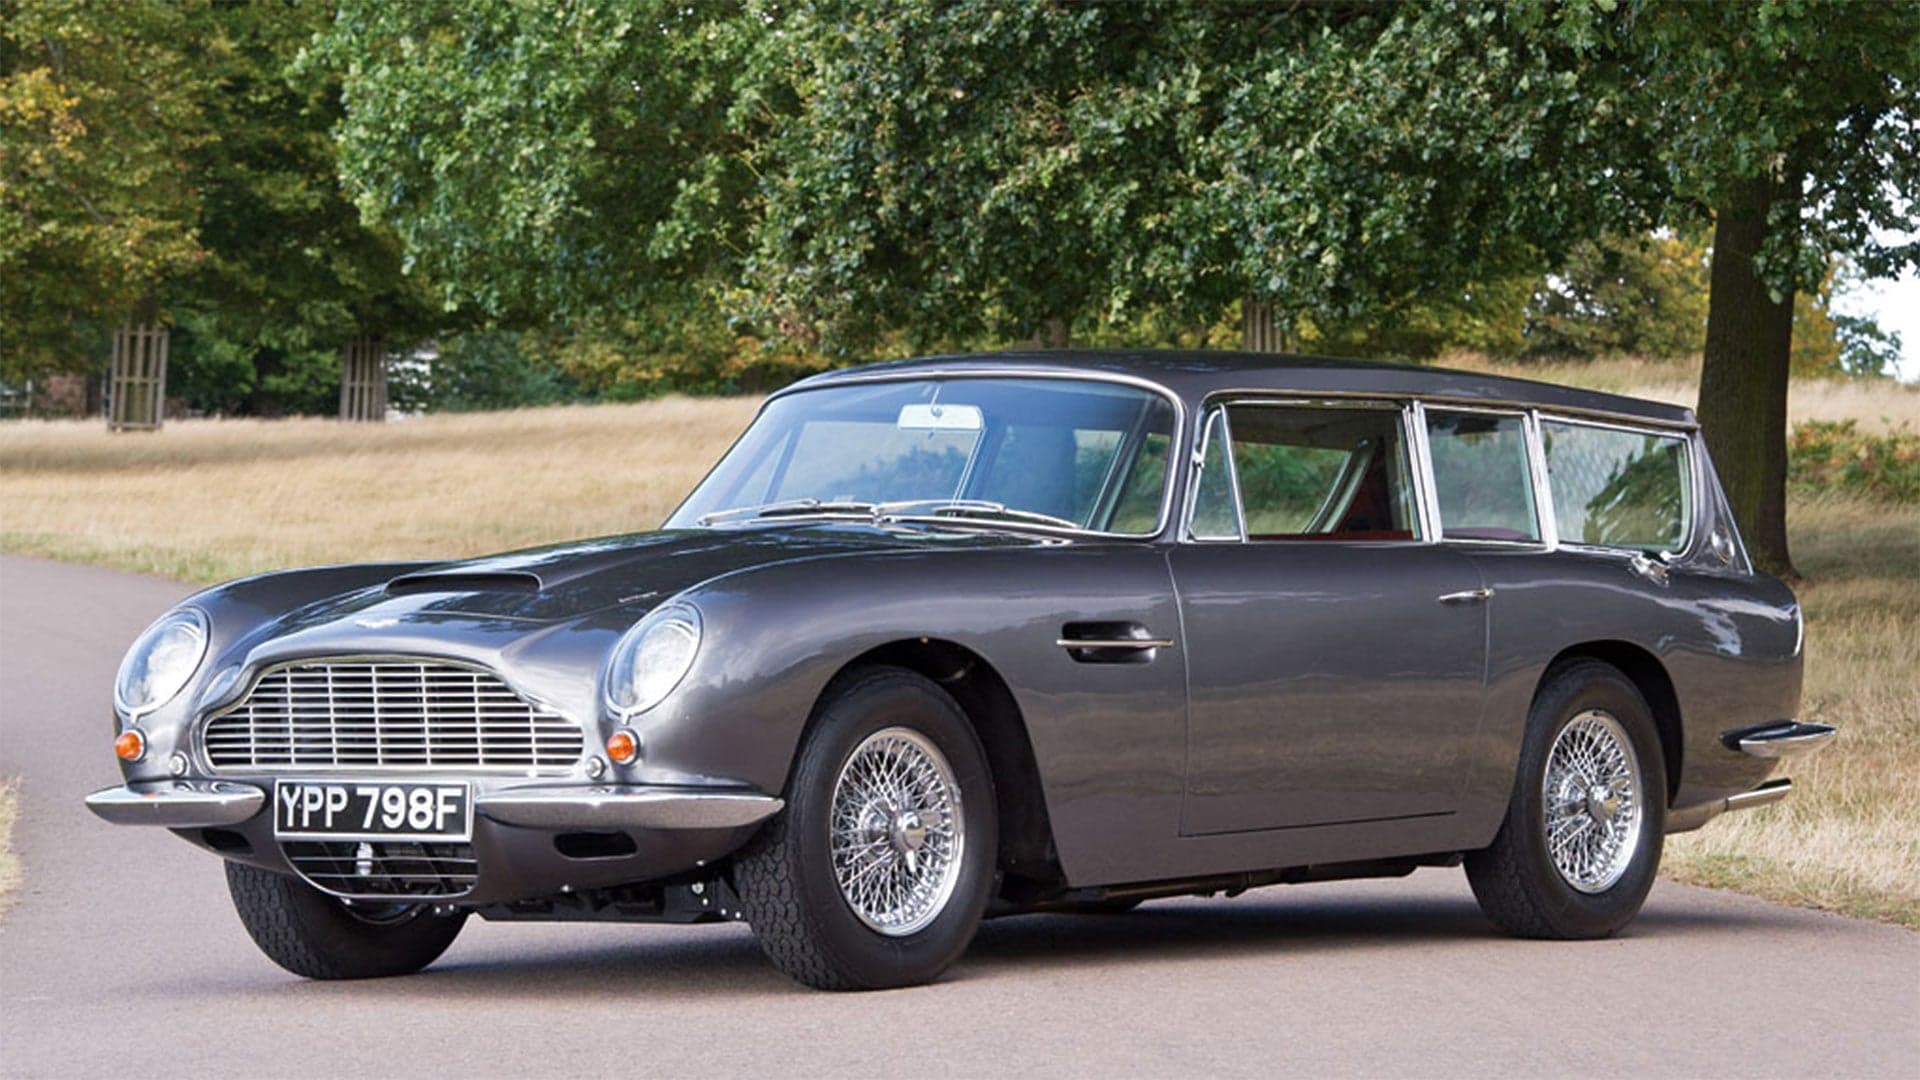 Is This Aston Martin DB6 Wagon the Greatest Shooting Brake of All Time?